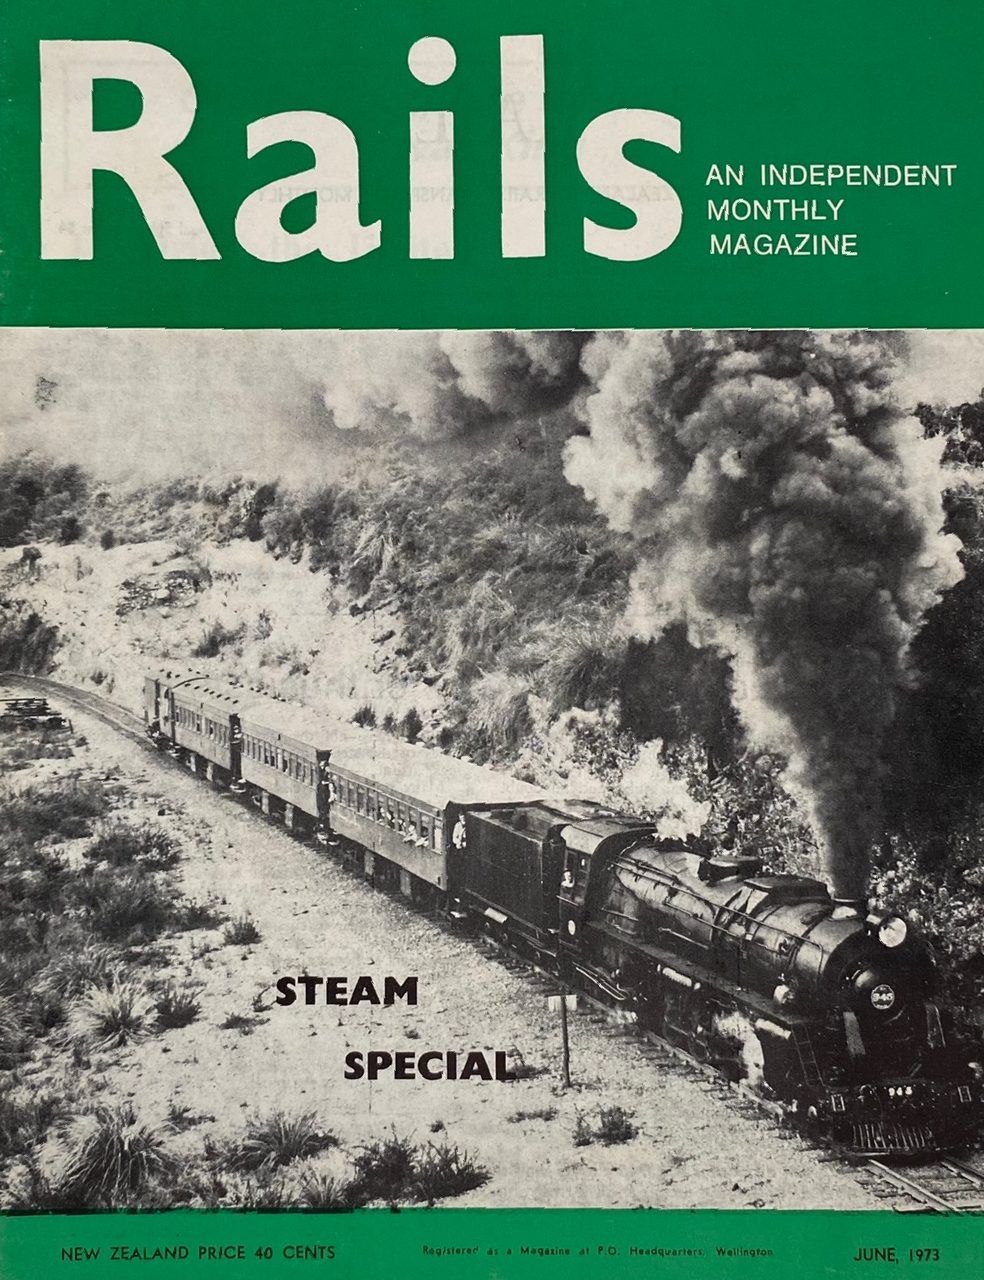 RAILS: An Independent Monthly Magazine - Steam Special